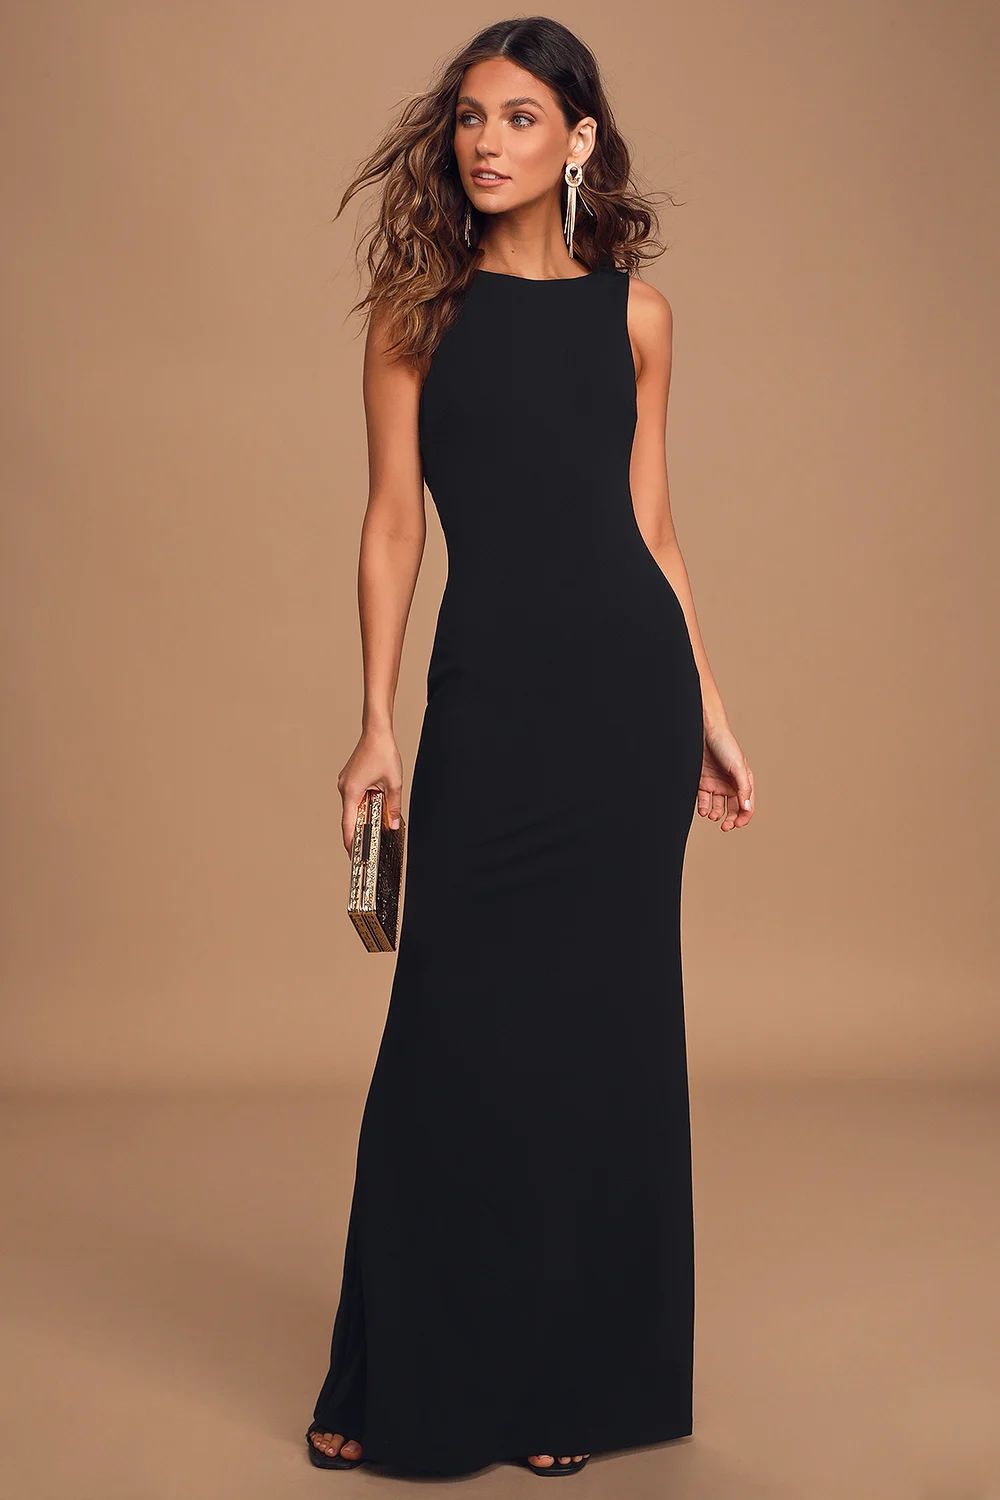 Love In Your Eyes Black Knotted Mermaid Maxi Dress | Lulus (US)